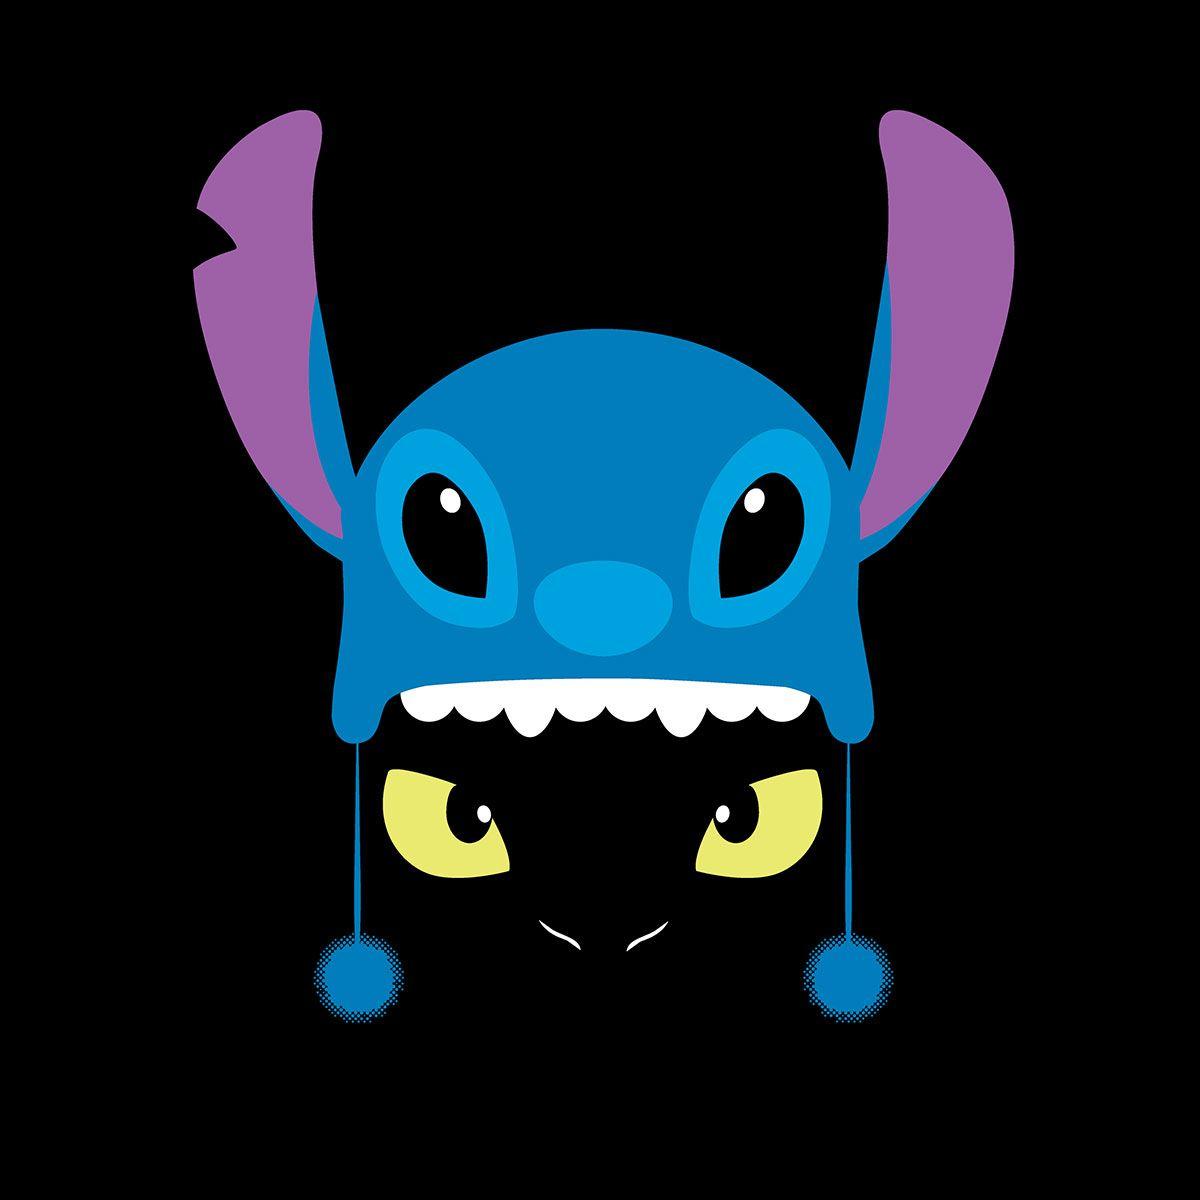 Toothless & Stitch by ilducagreco. Geekery. Stitch, Toothless